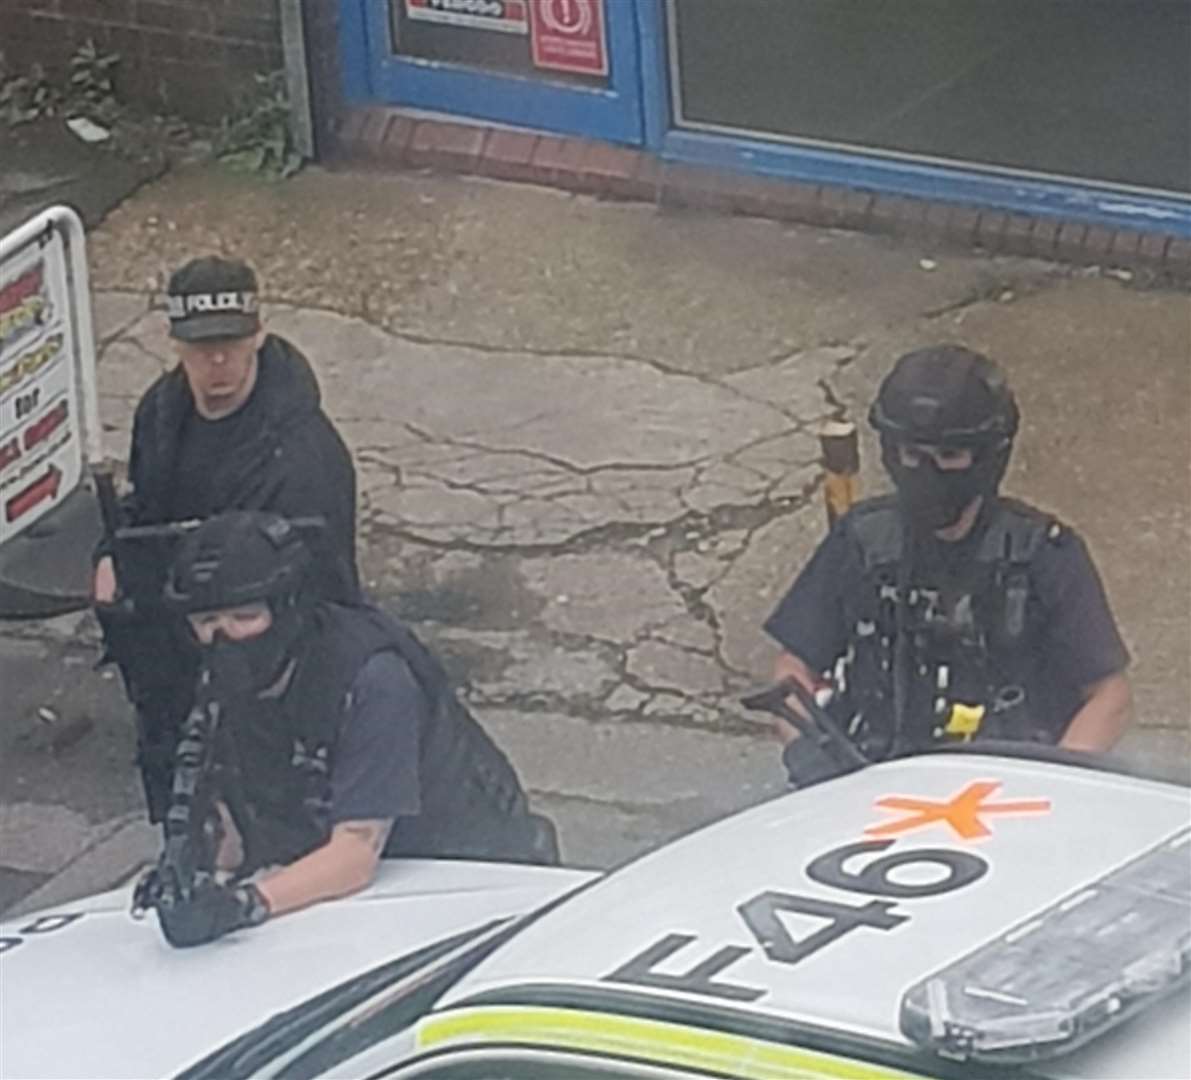 Armed police in Luton Road, Chatham (2270992)